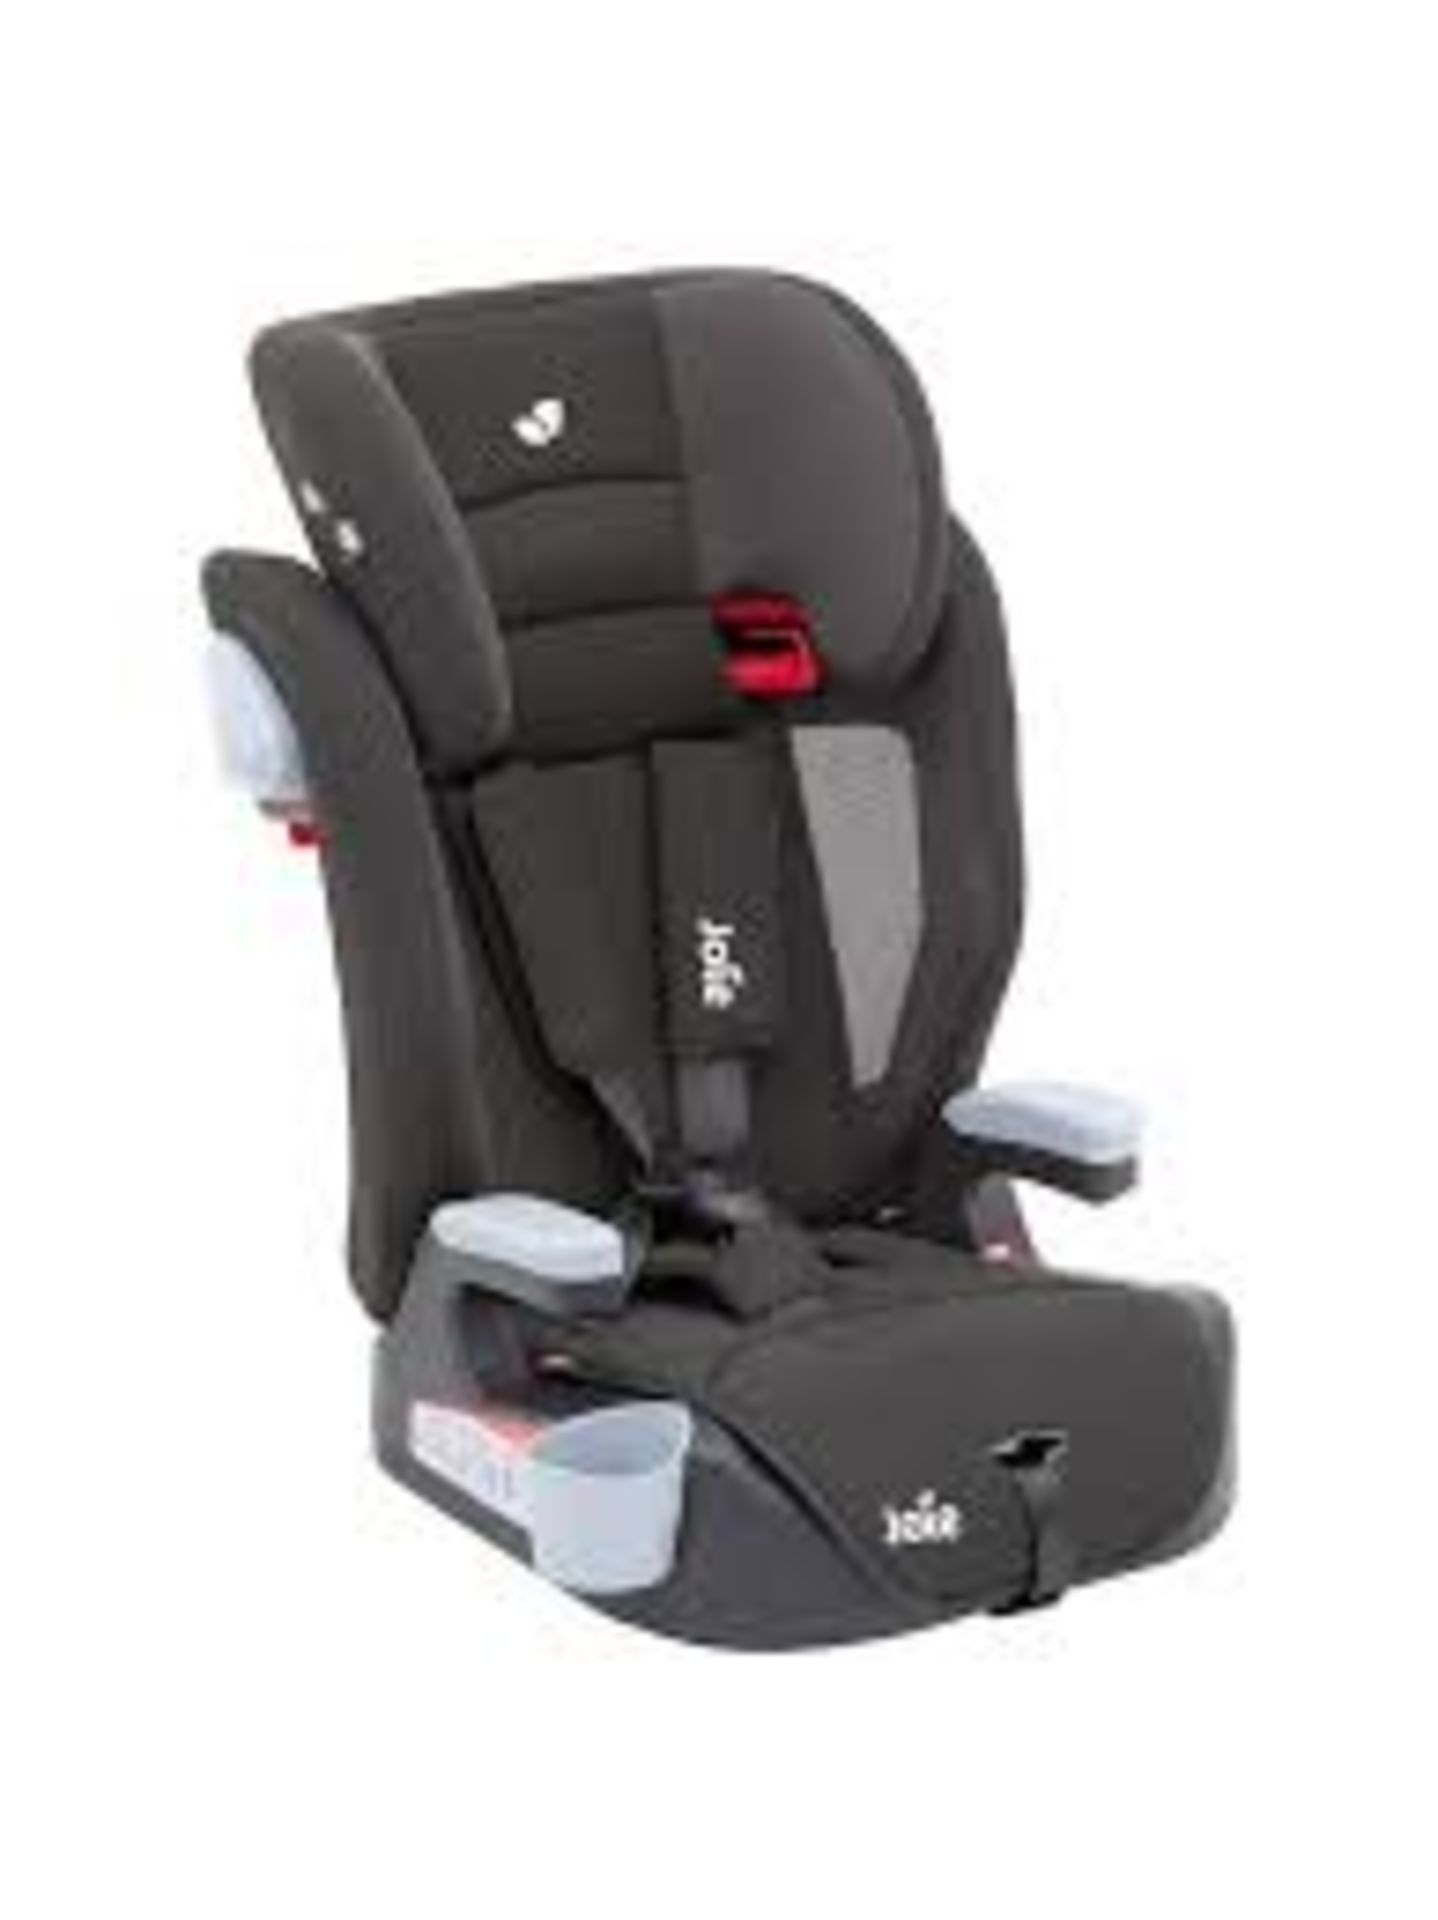 Boxed Meet Elevate Joie Stages 1,2 and 3 Car Booster Seat RRP £70 (3641930) (Public Viewing and